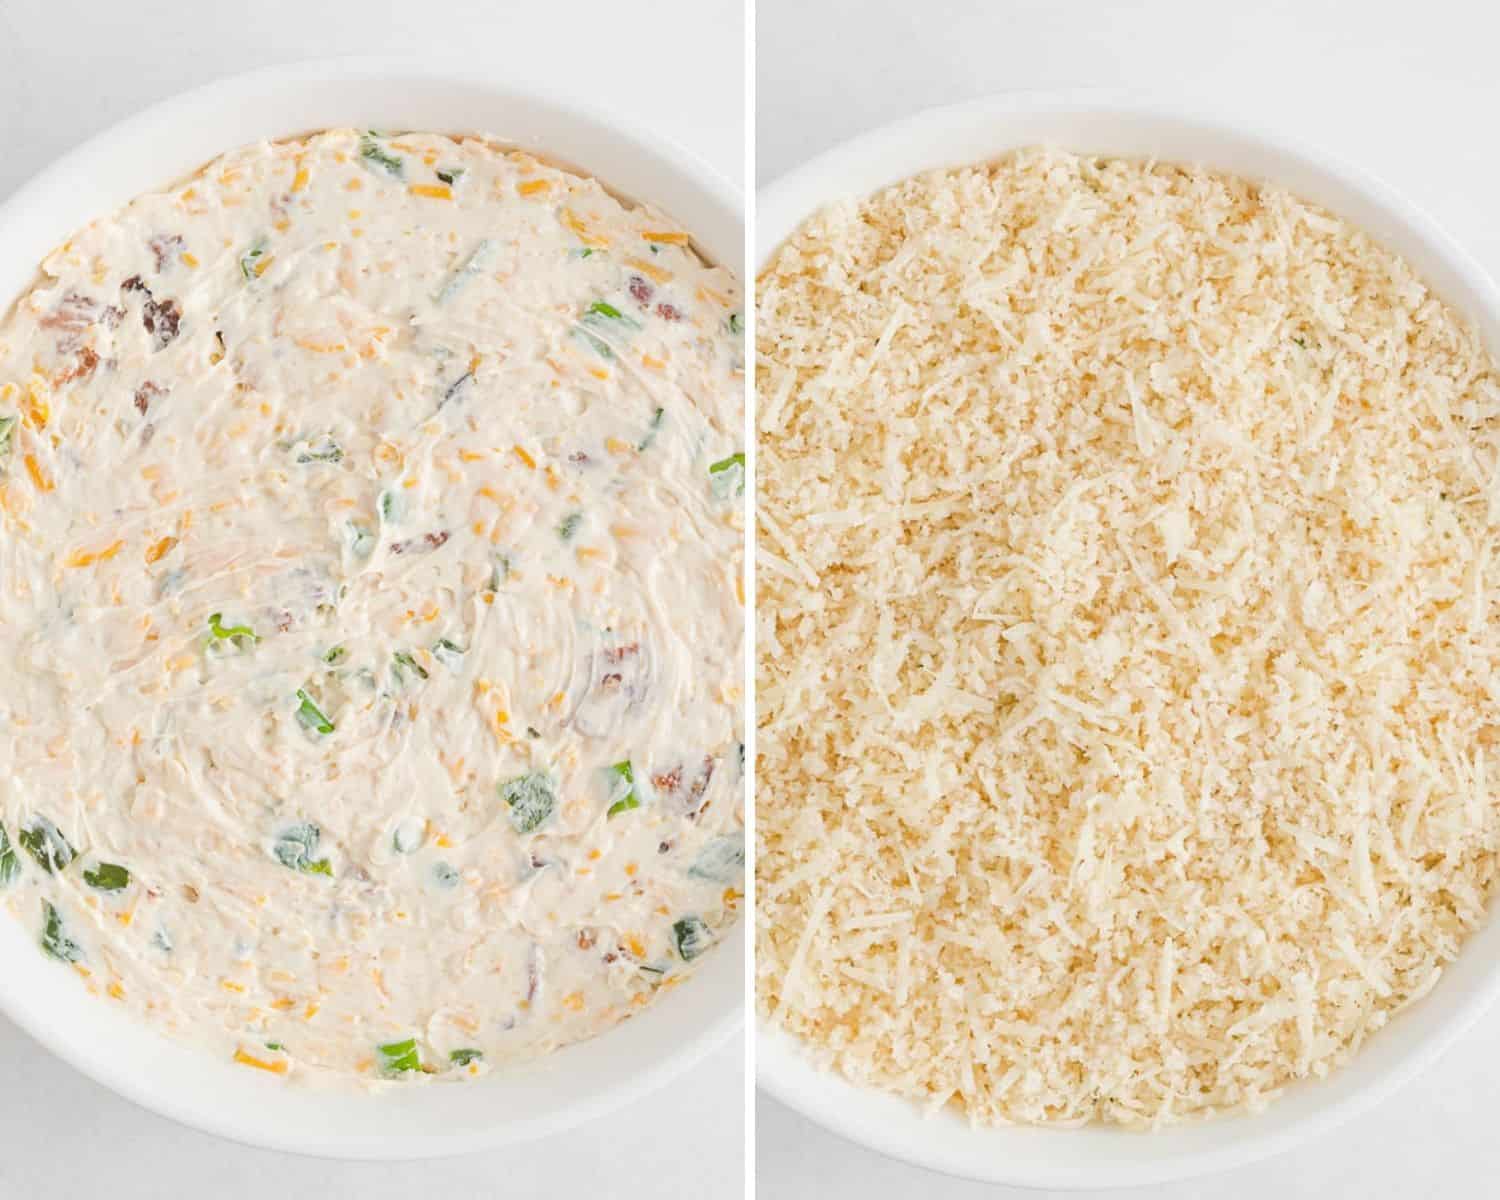 Dip before and after adding panko topping.